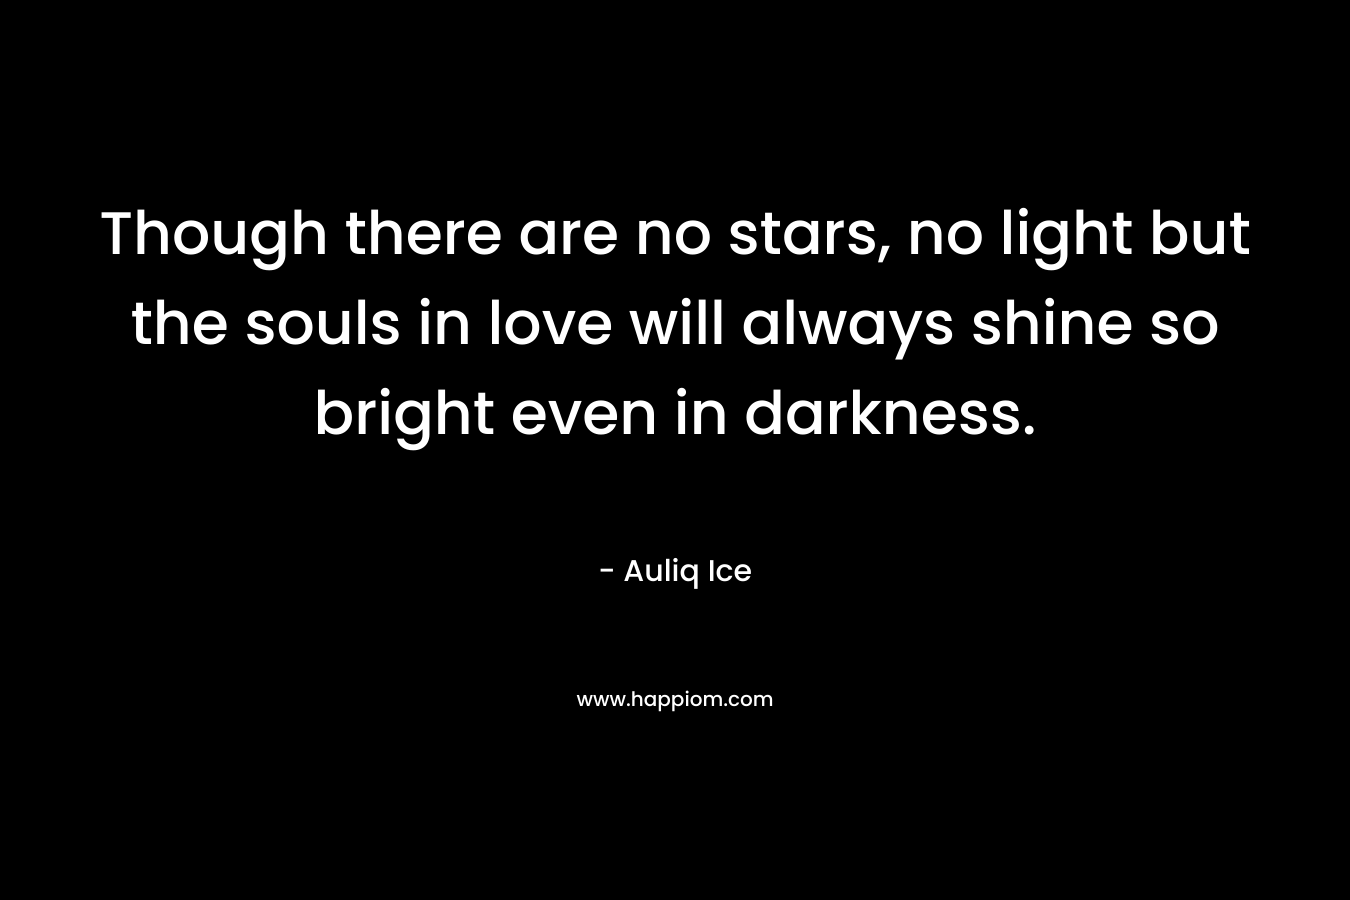 Though there are no stars, no light but the souls in love will always shine so bright even in darkness.